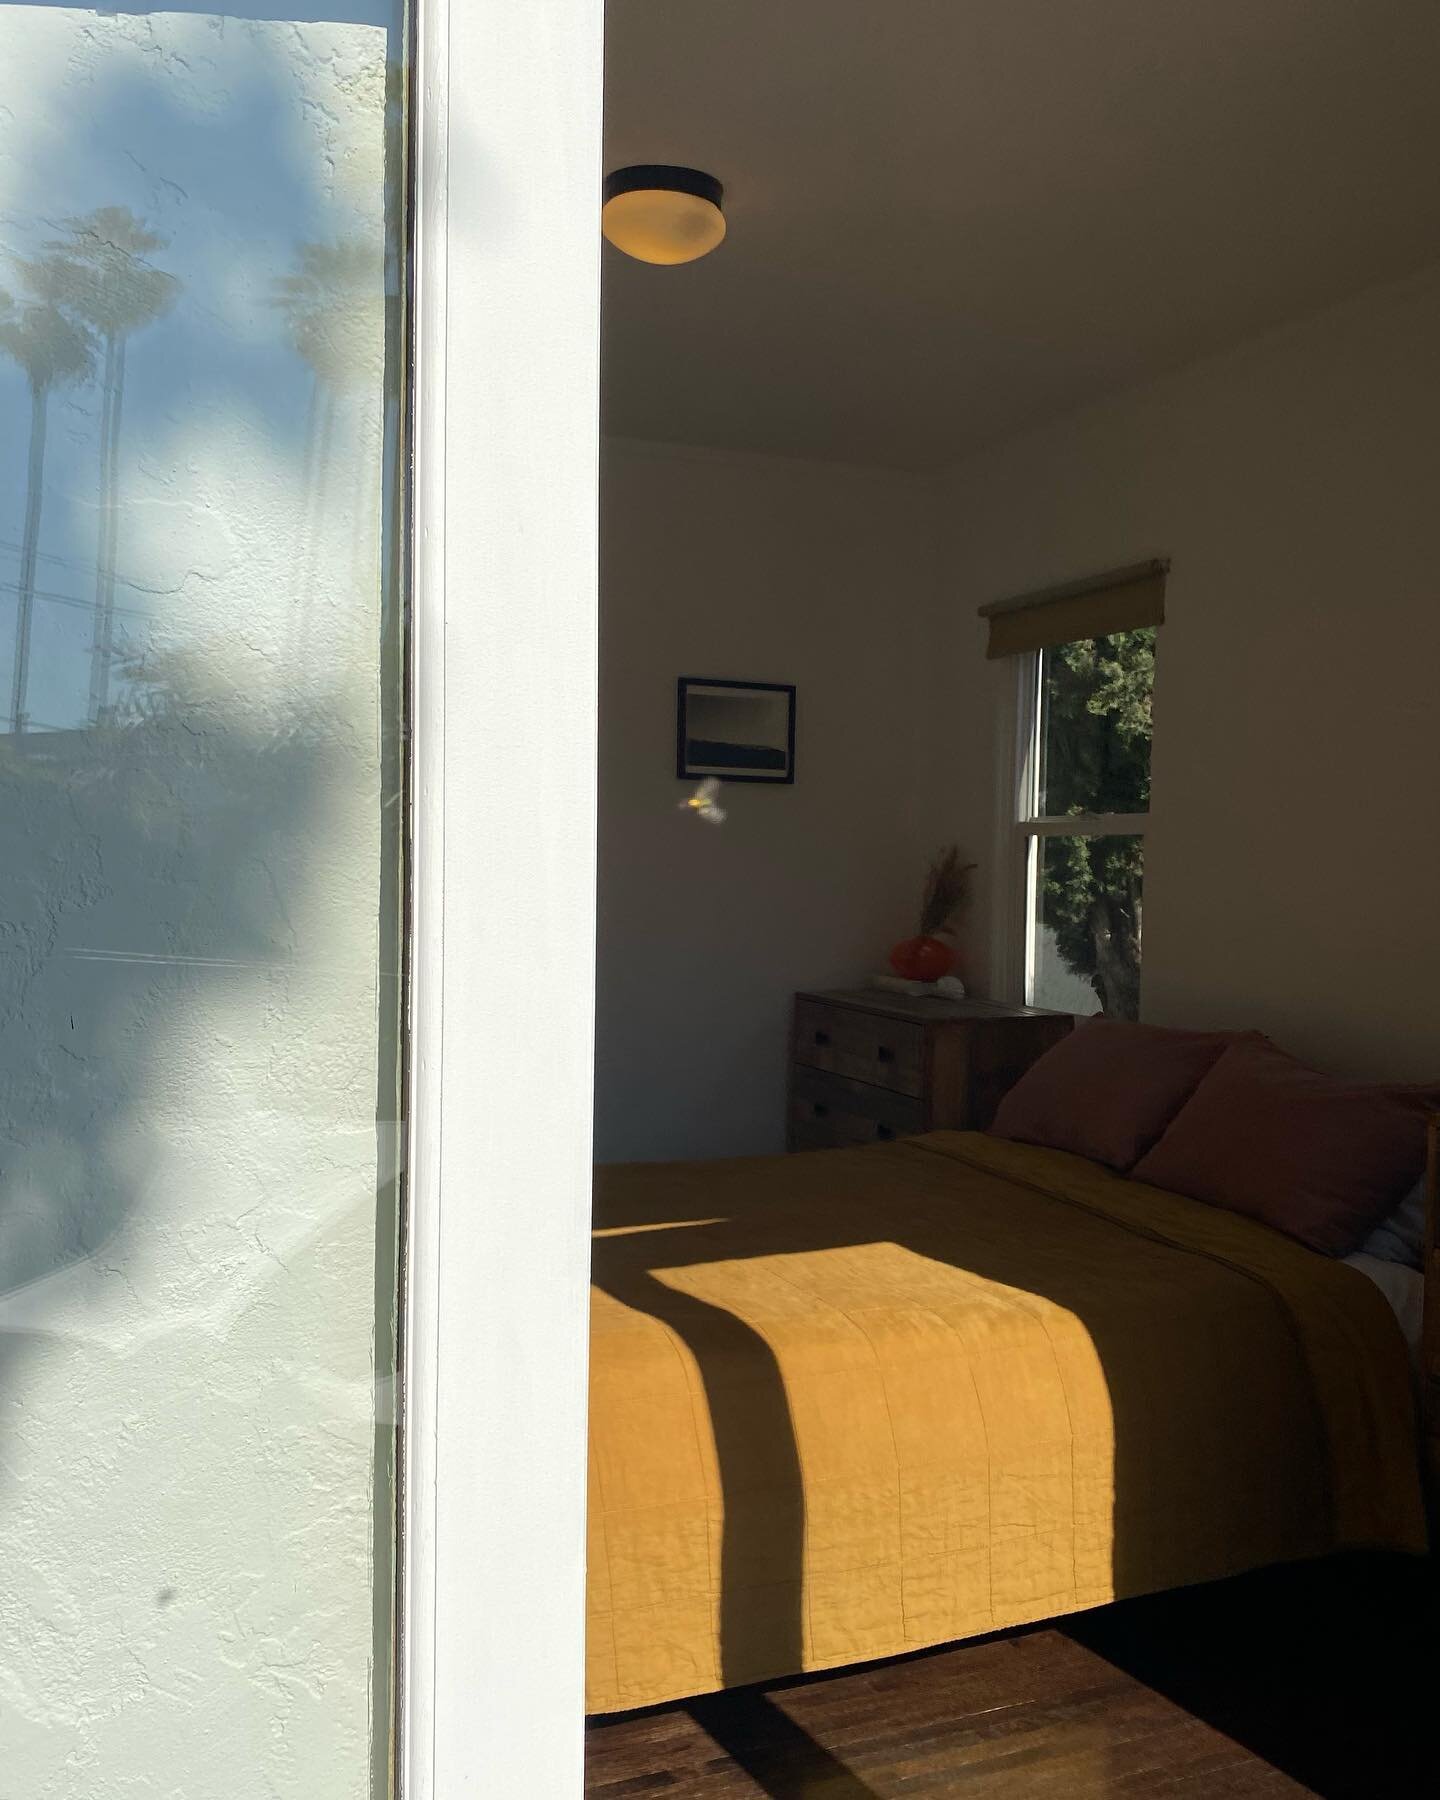 This light is so LA. Catch the Palms reflection in the window. Dreamy.

#realestate #losangeles #losangelesrealestateagent #realestateagent #realestateinvesting #realtorlife #realestatetips #realestateexpert #Realestatebroker #realestatepro #realesta